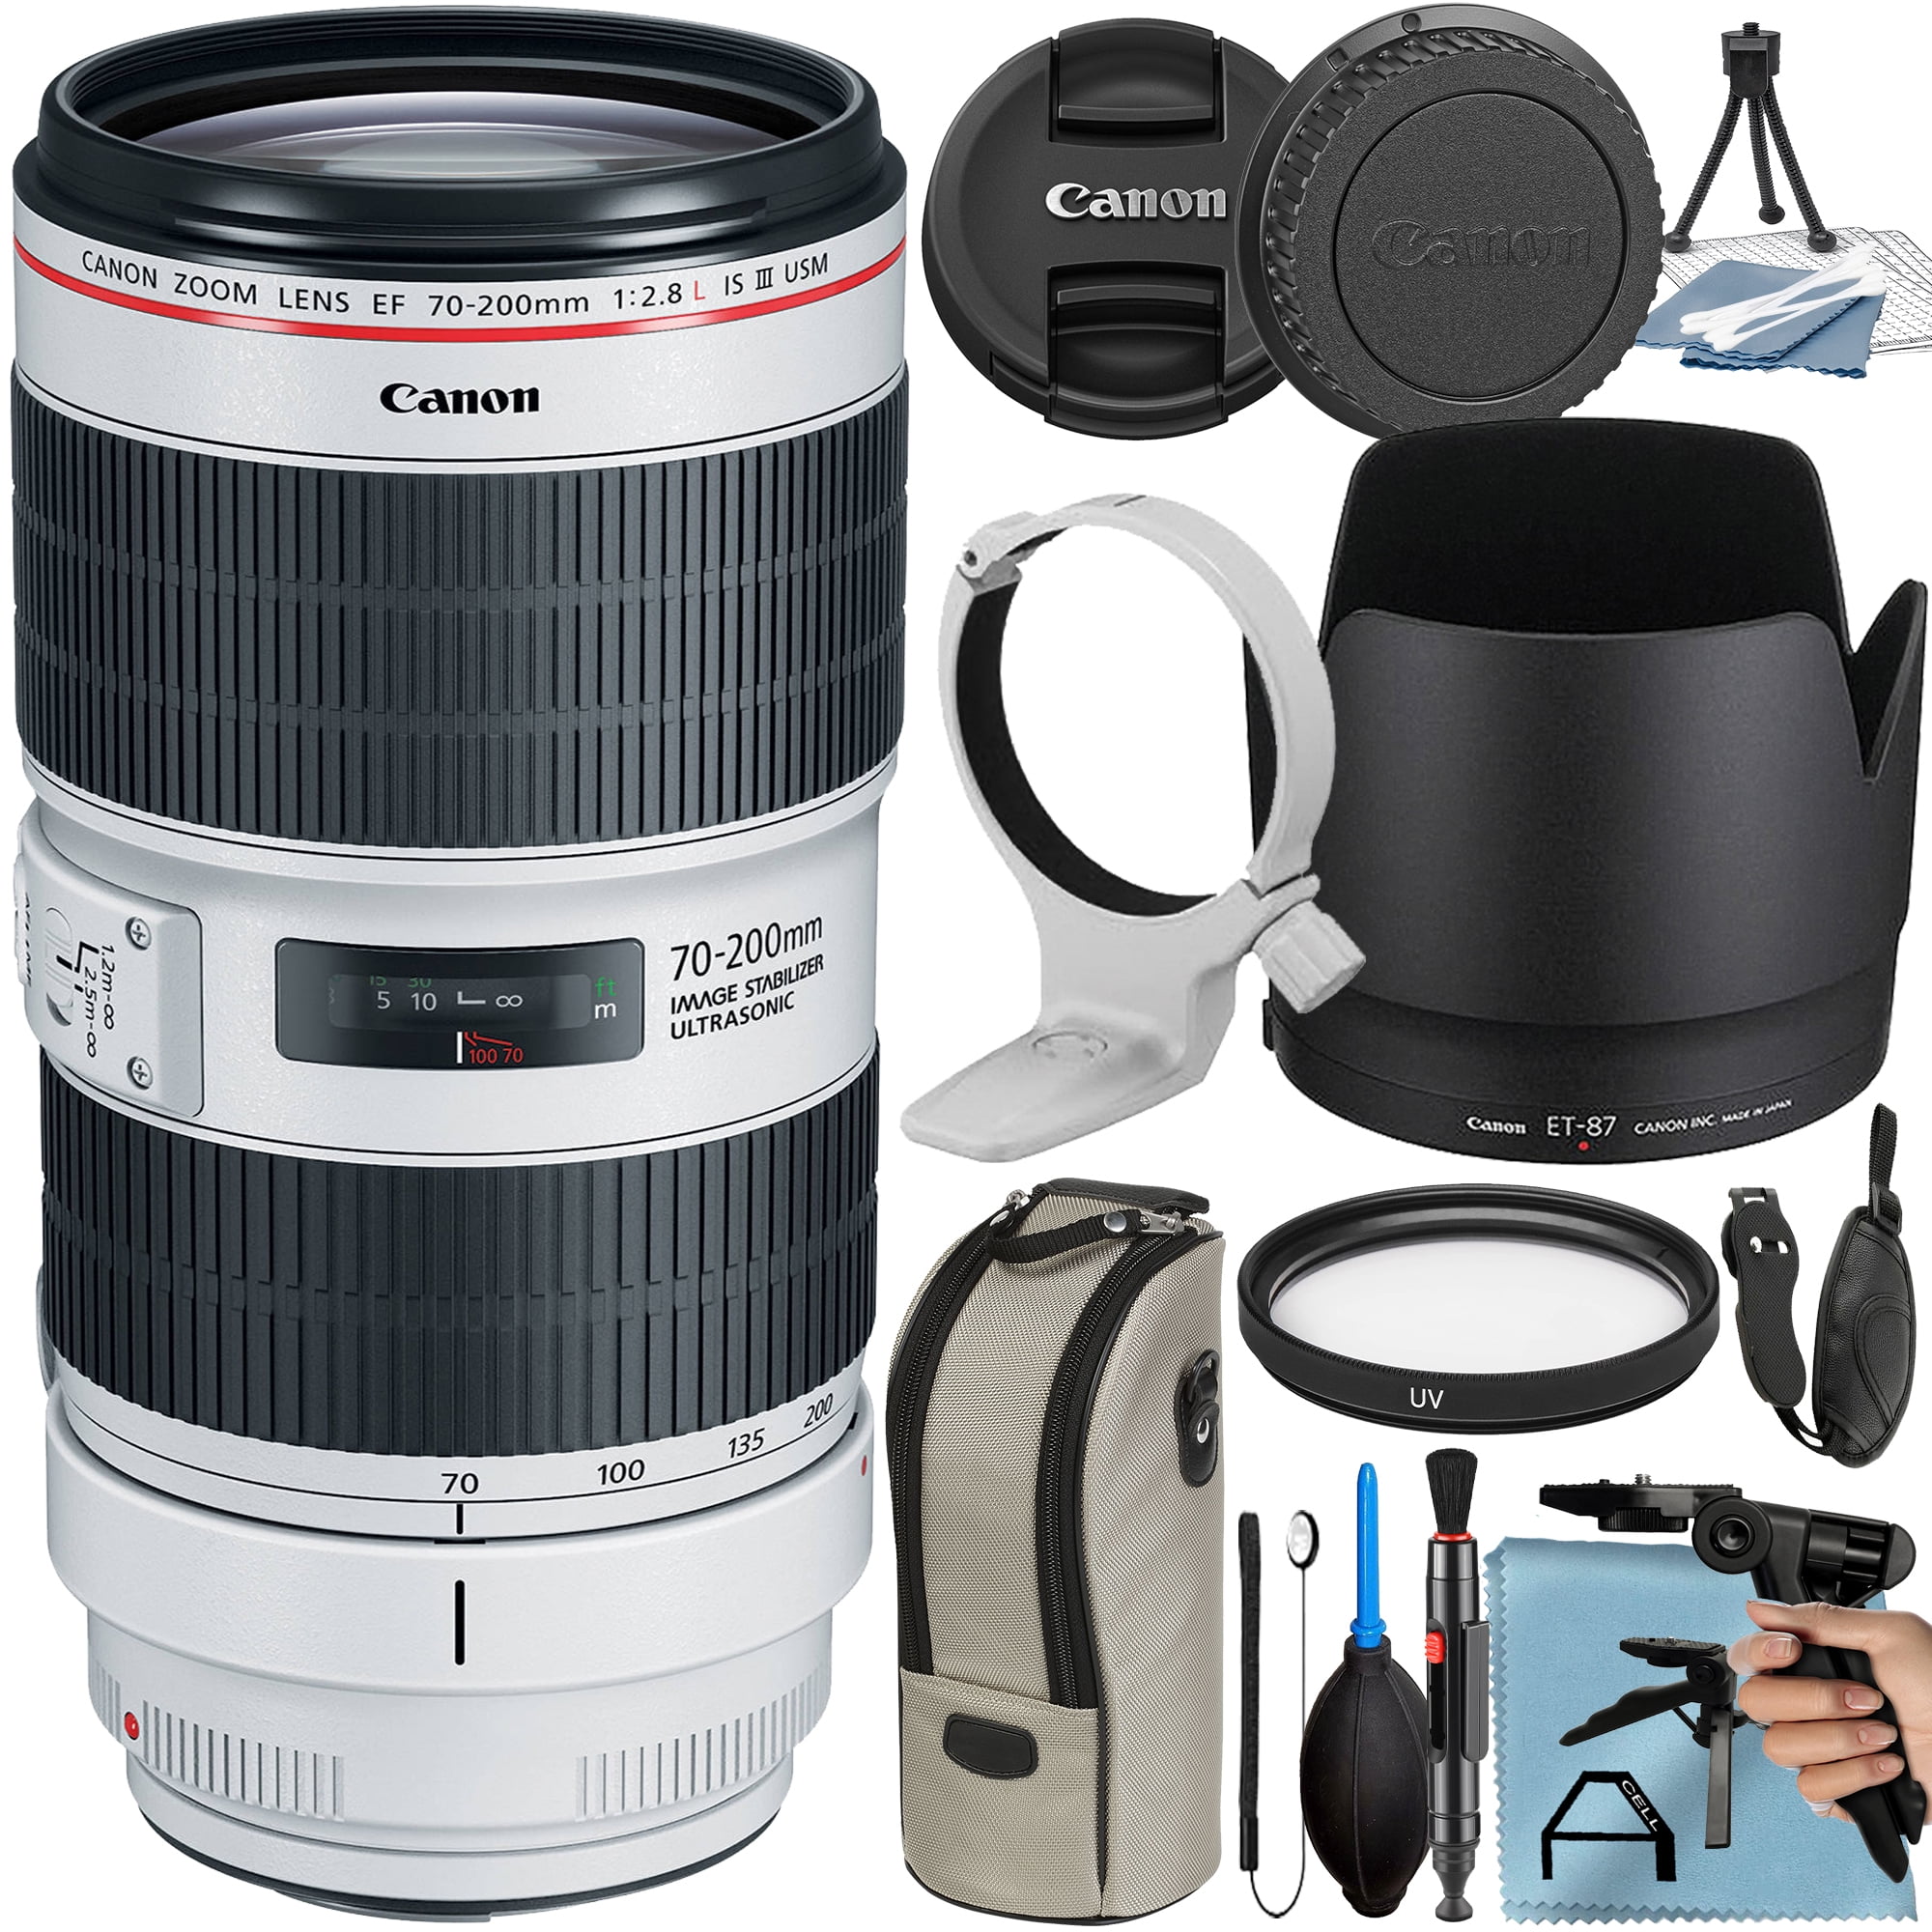 Canon EF 70-200mm f/2.8L IS III USM Lens with Tripod + UV Filter +